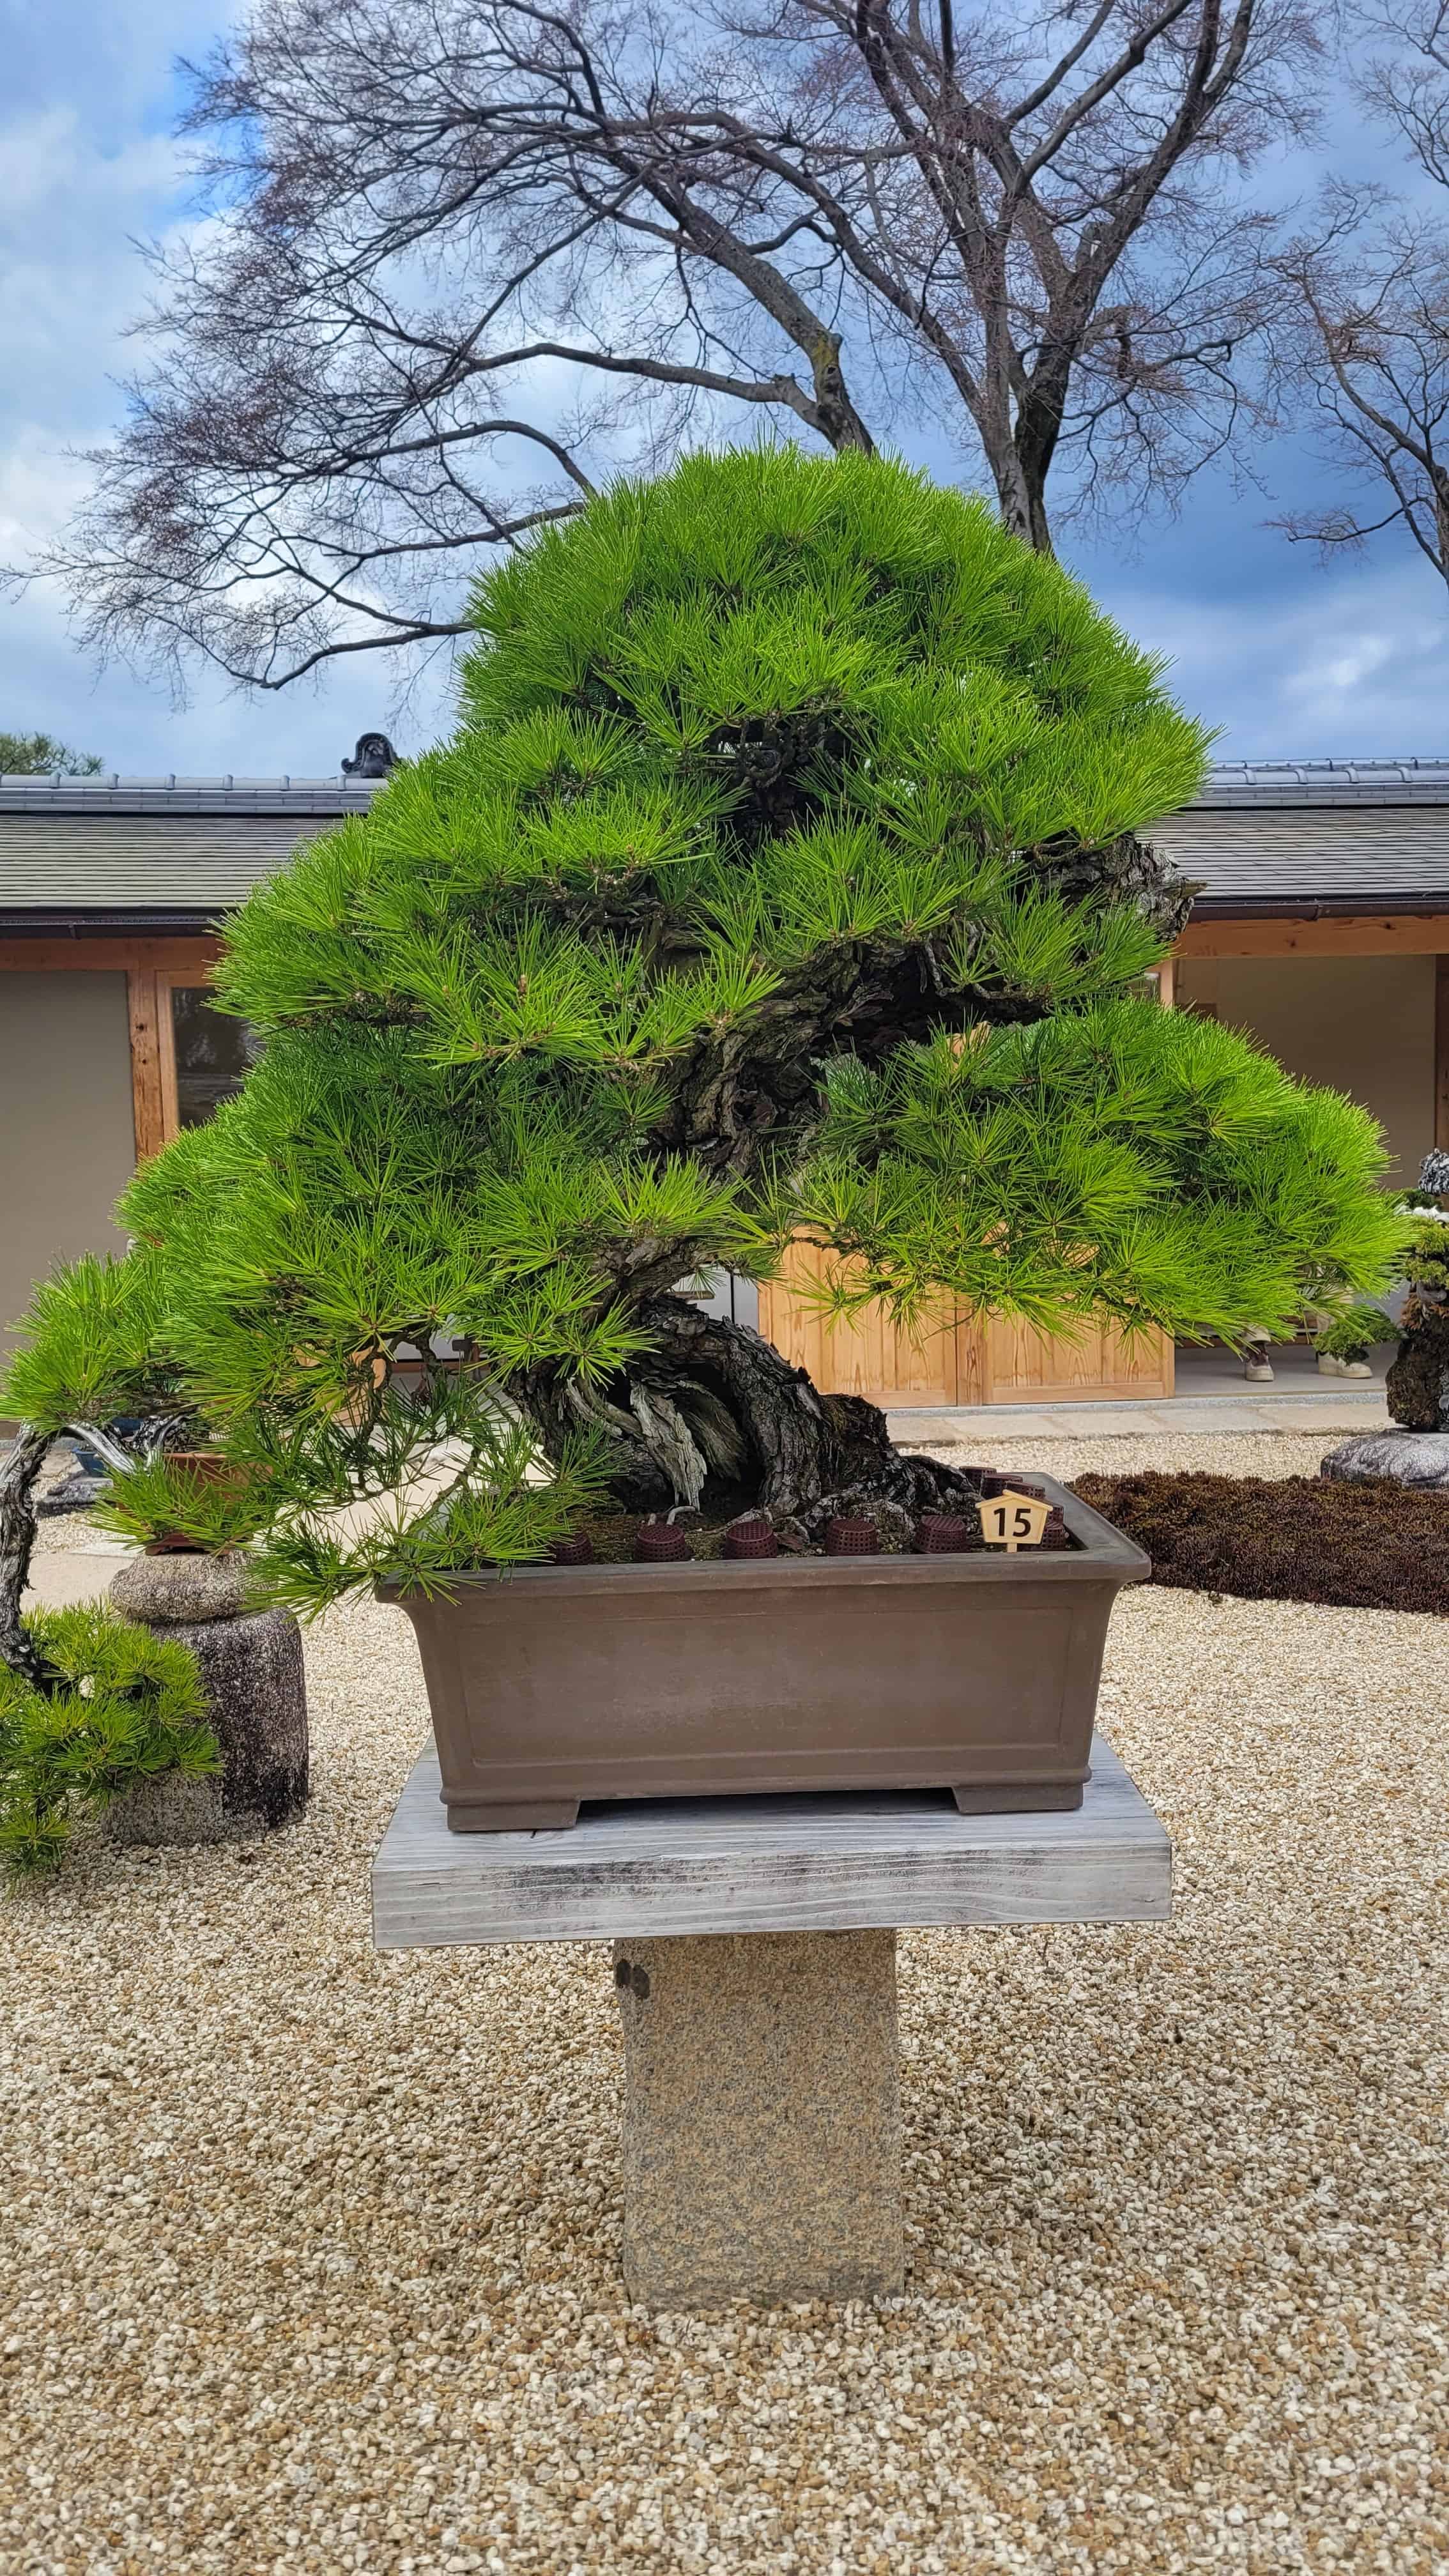 A pine bonsai tree from kyoto in Japan